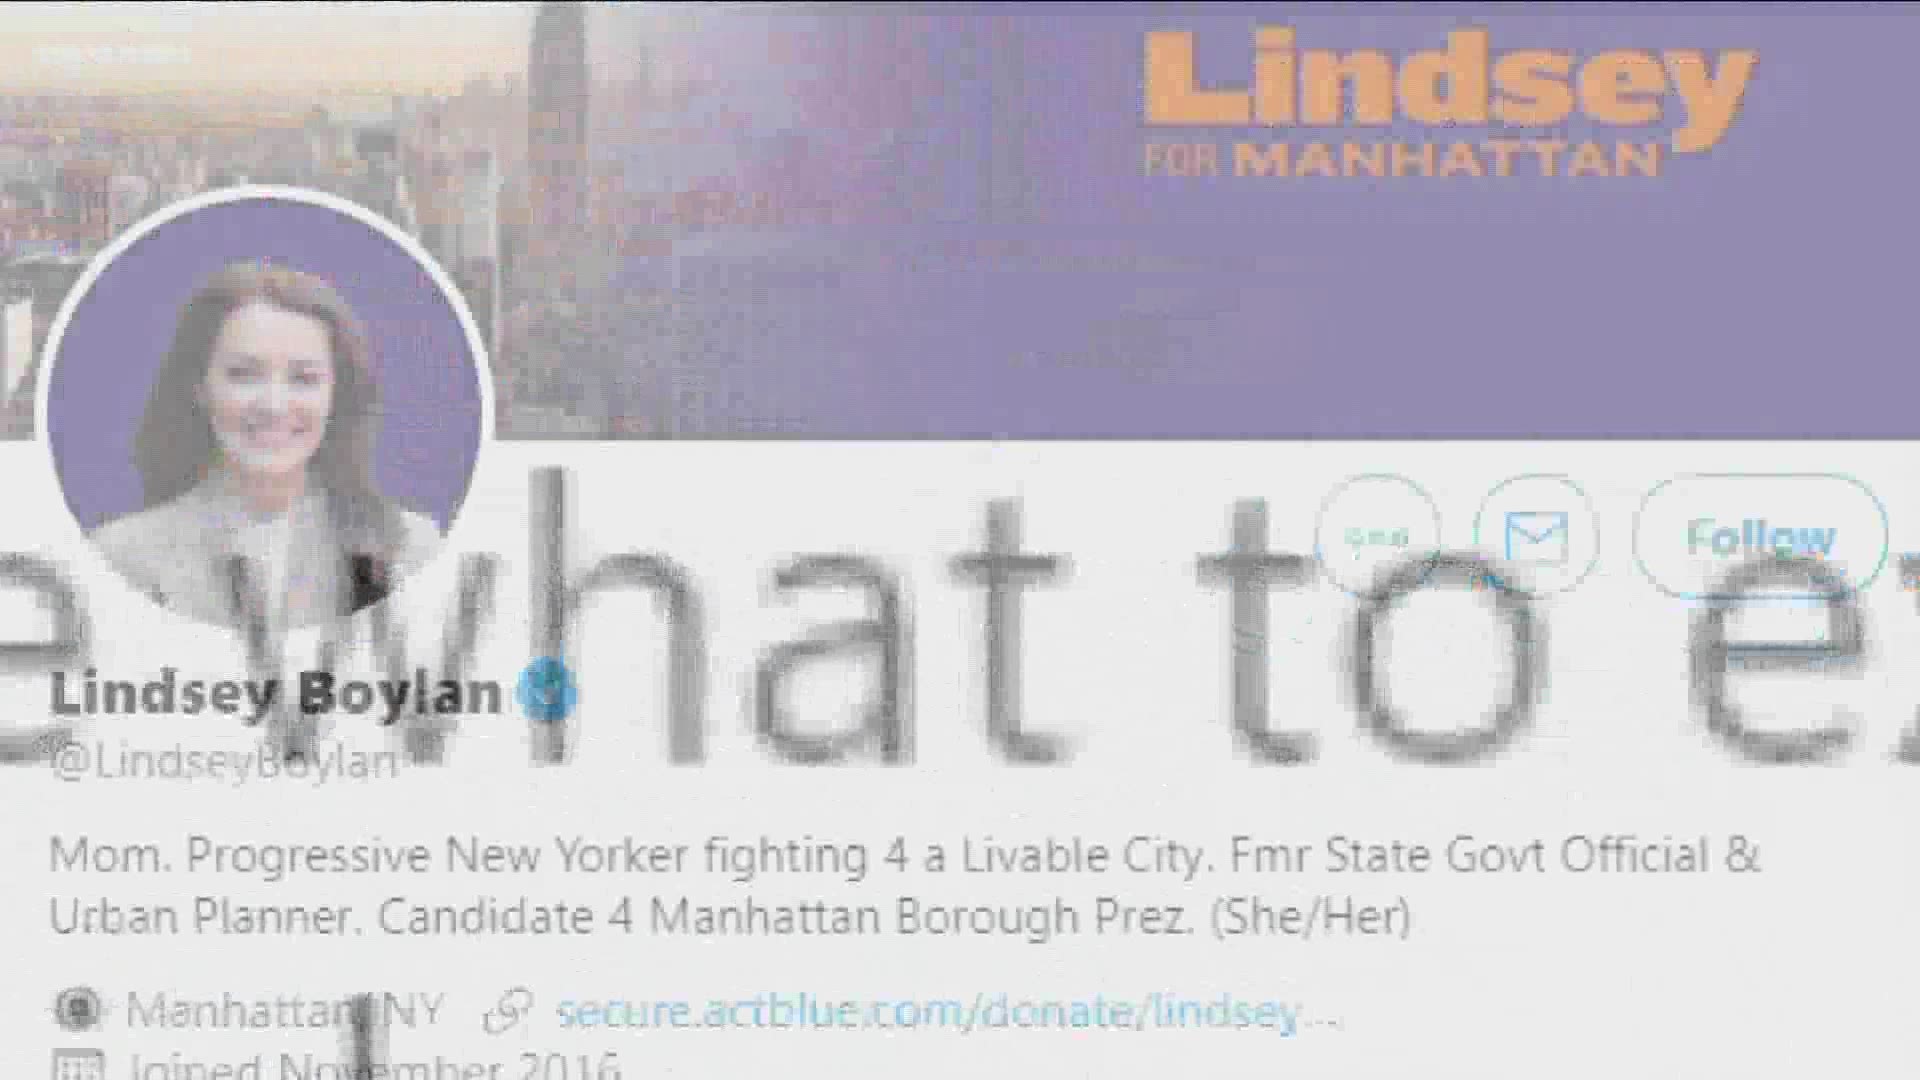 Lindsey Boylan claimed while working for the Cuomo administration, she was sexually harassed for years.